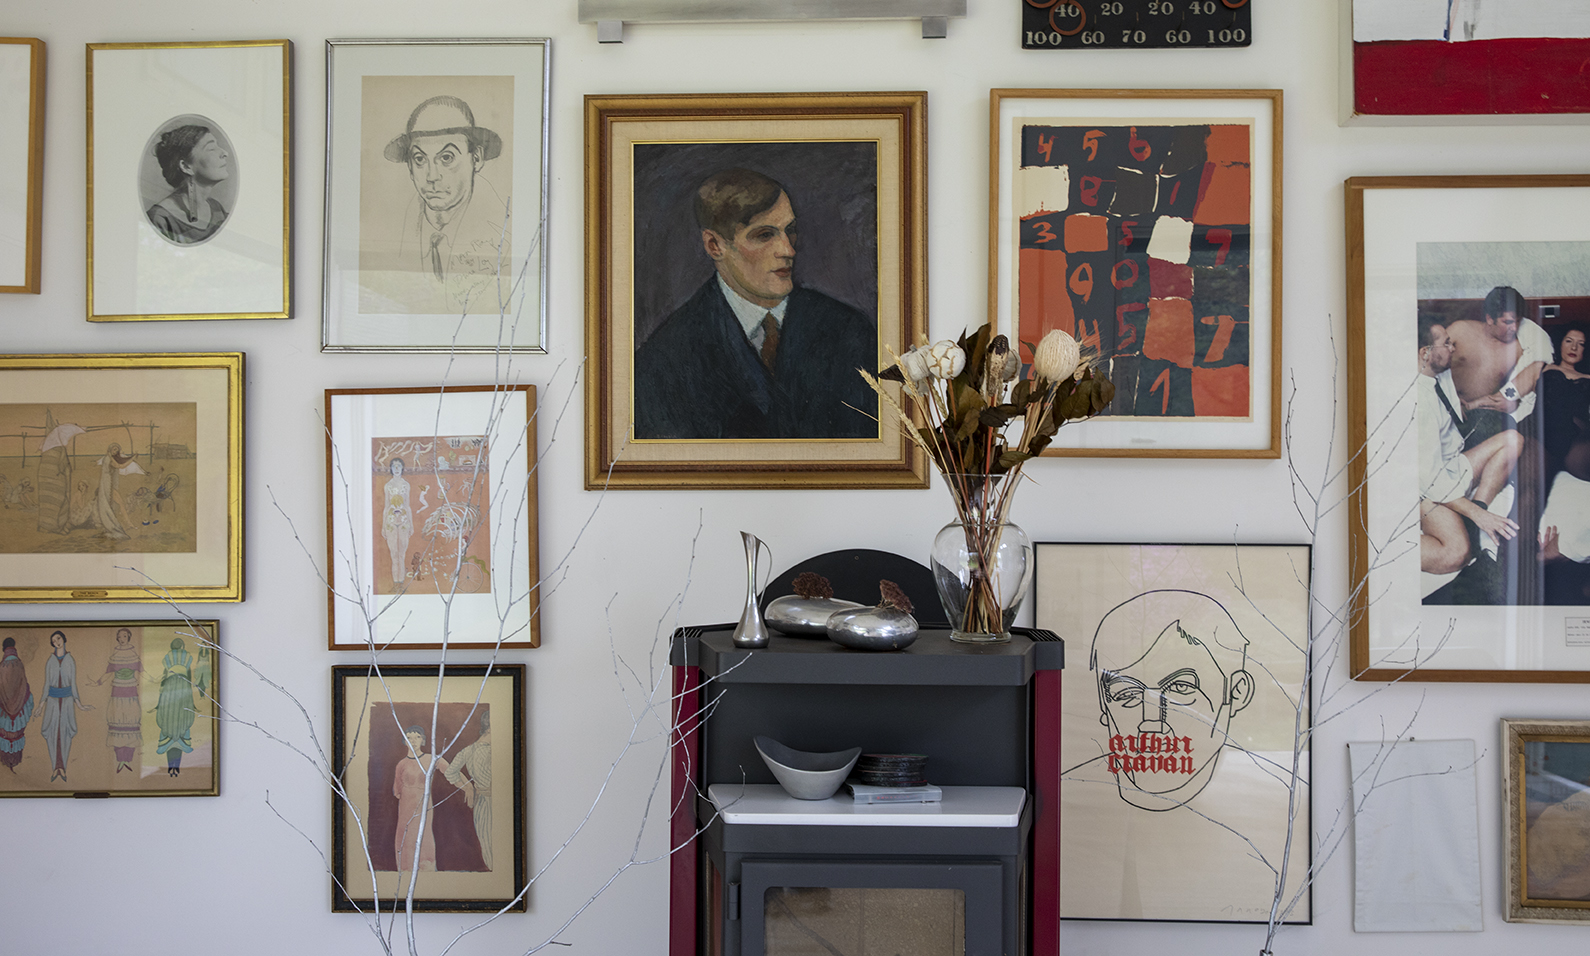 interior wall of Conover's home, containing paintings and portraits by Loy and other avant-garde artists, hung salon style.